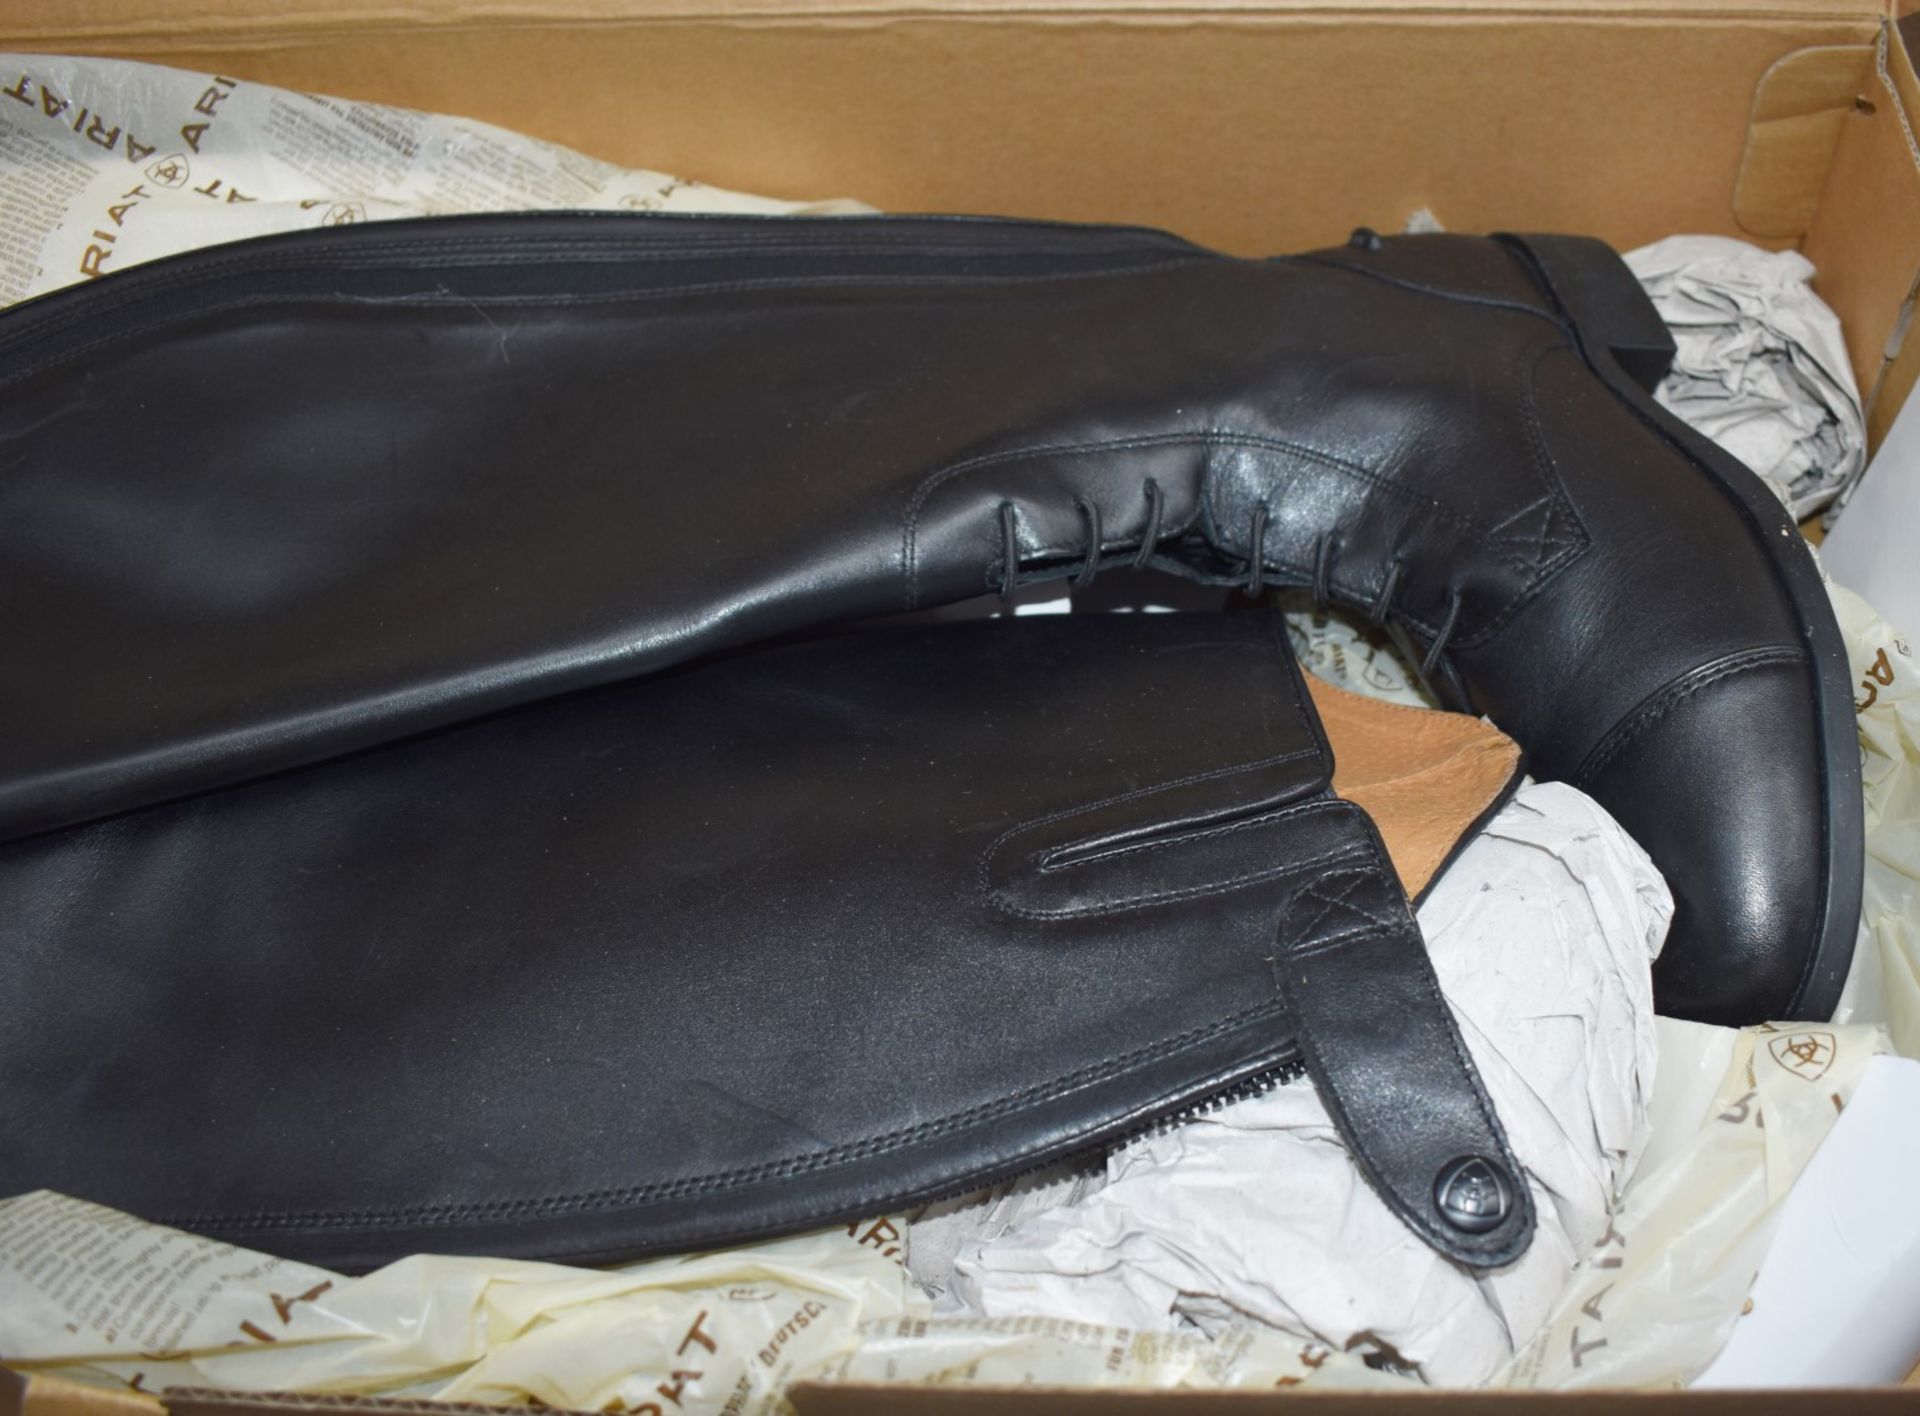 1 x Pair of Ariat Heritage Contour Field Zip Horse Riding Boots - Size 4.5 - Ex Display Boxed - Image 5 of 5